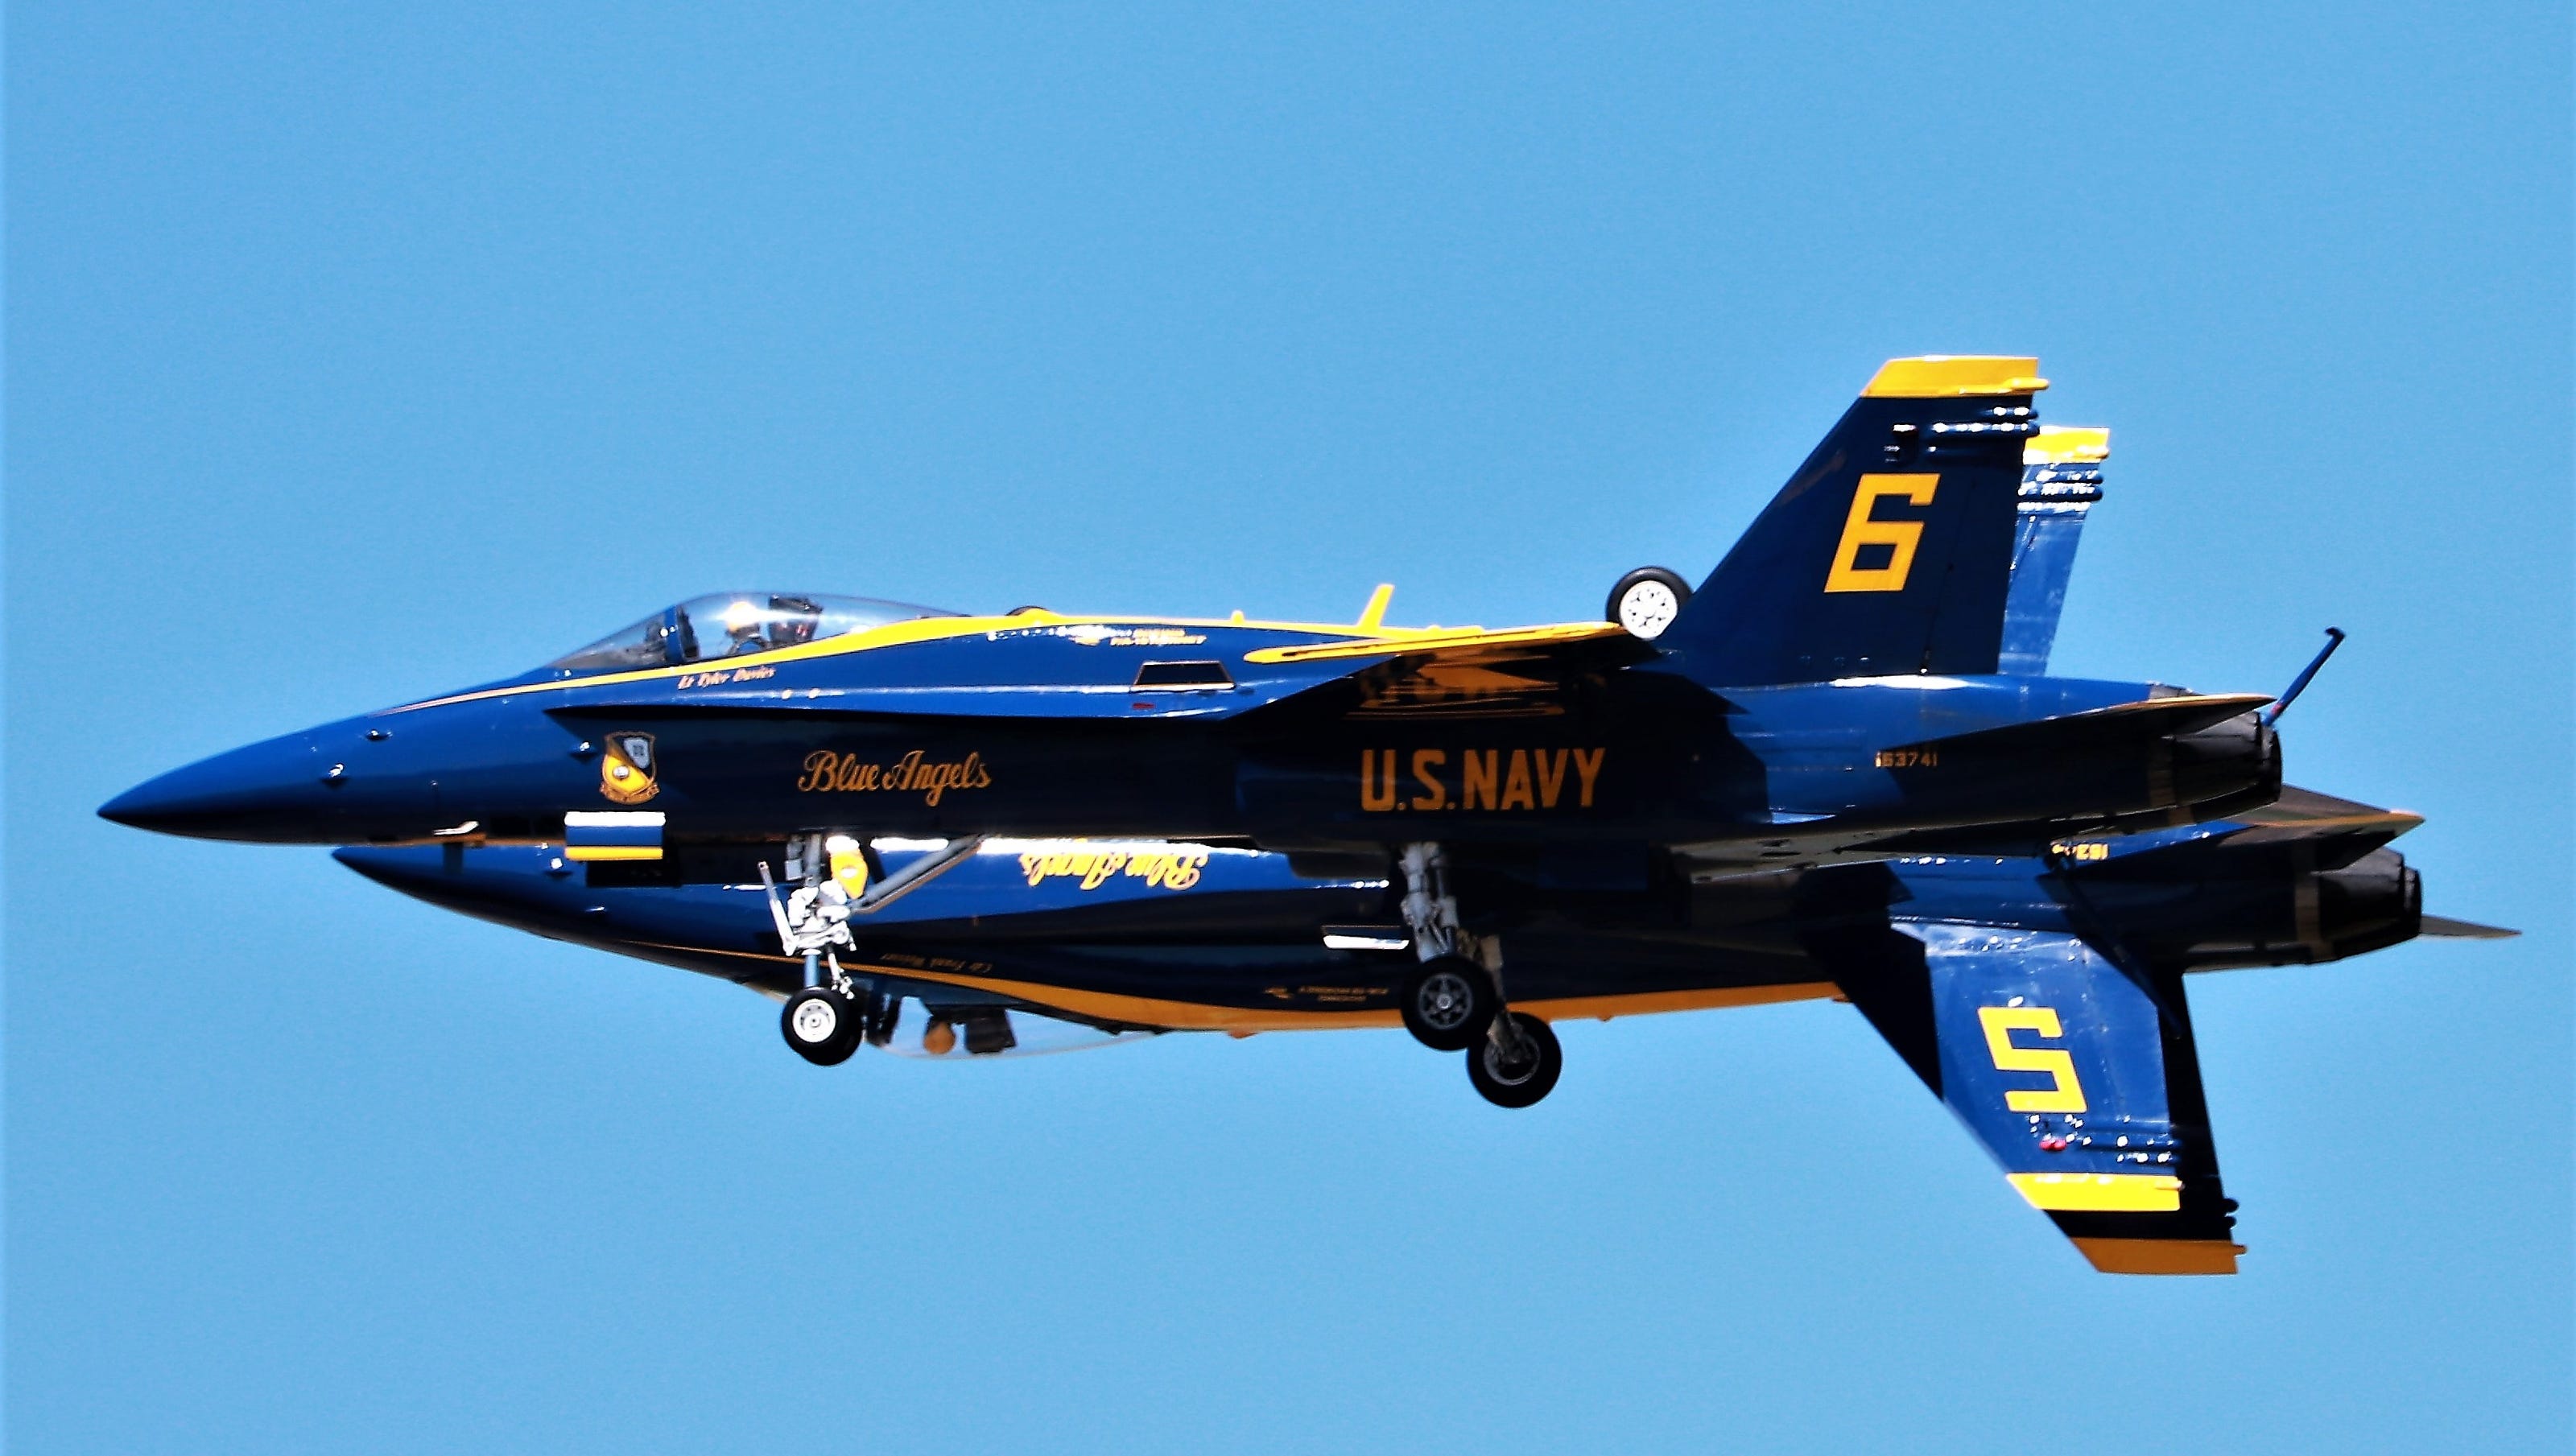 Barksdale Air Show 2023 will feature Blue Angels